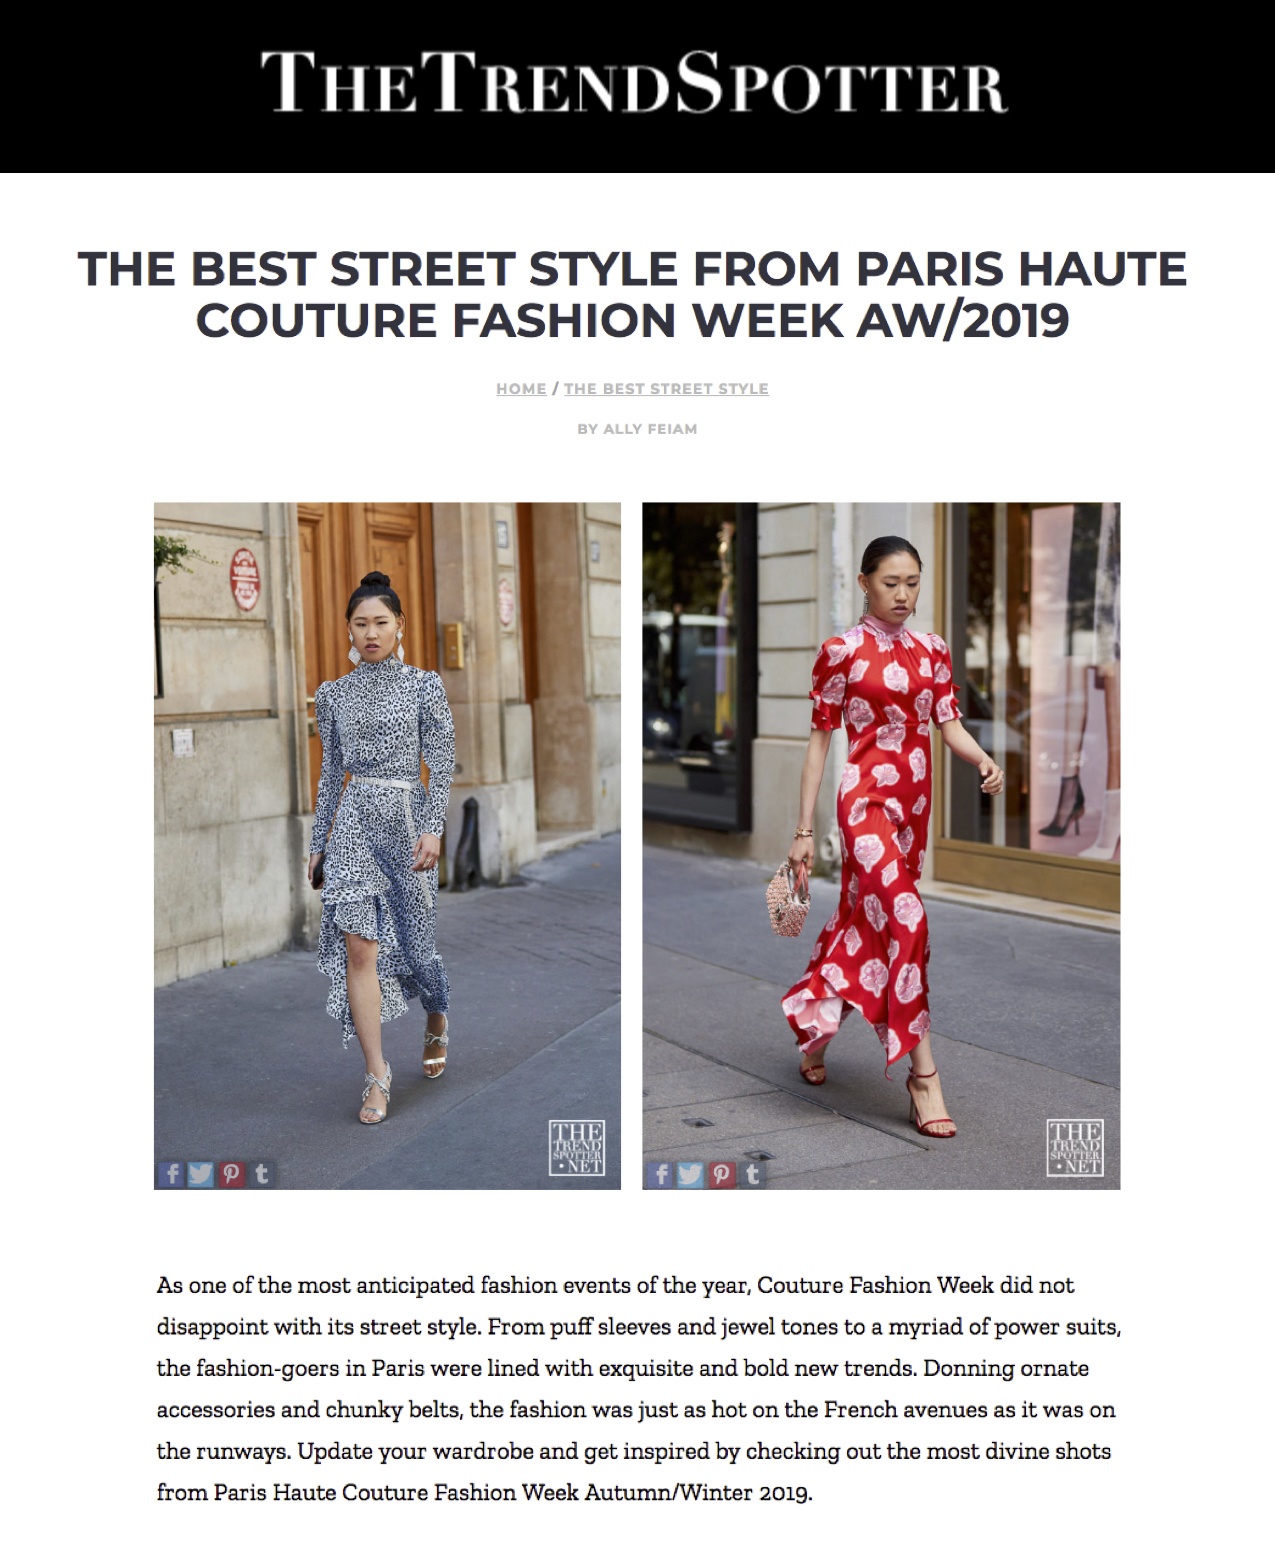 The Trend Spotter: The Best Street Style From Paris Haute Couture Fashion Week AW/2019